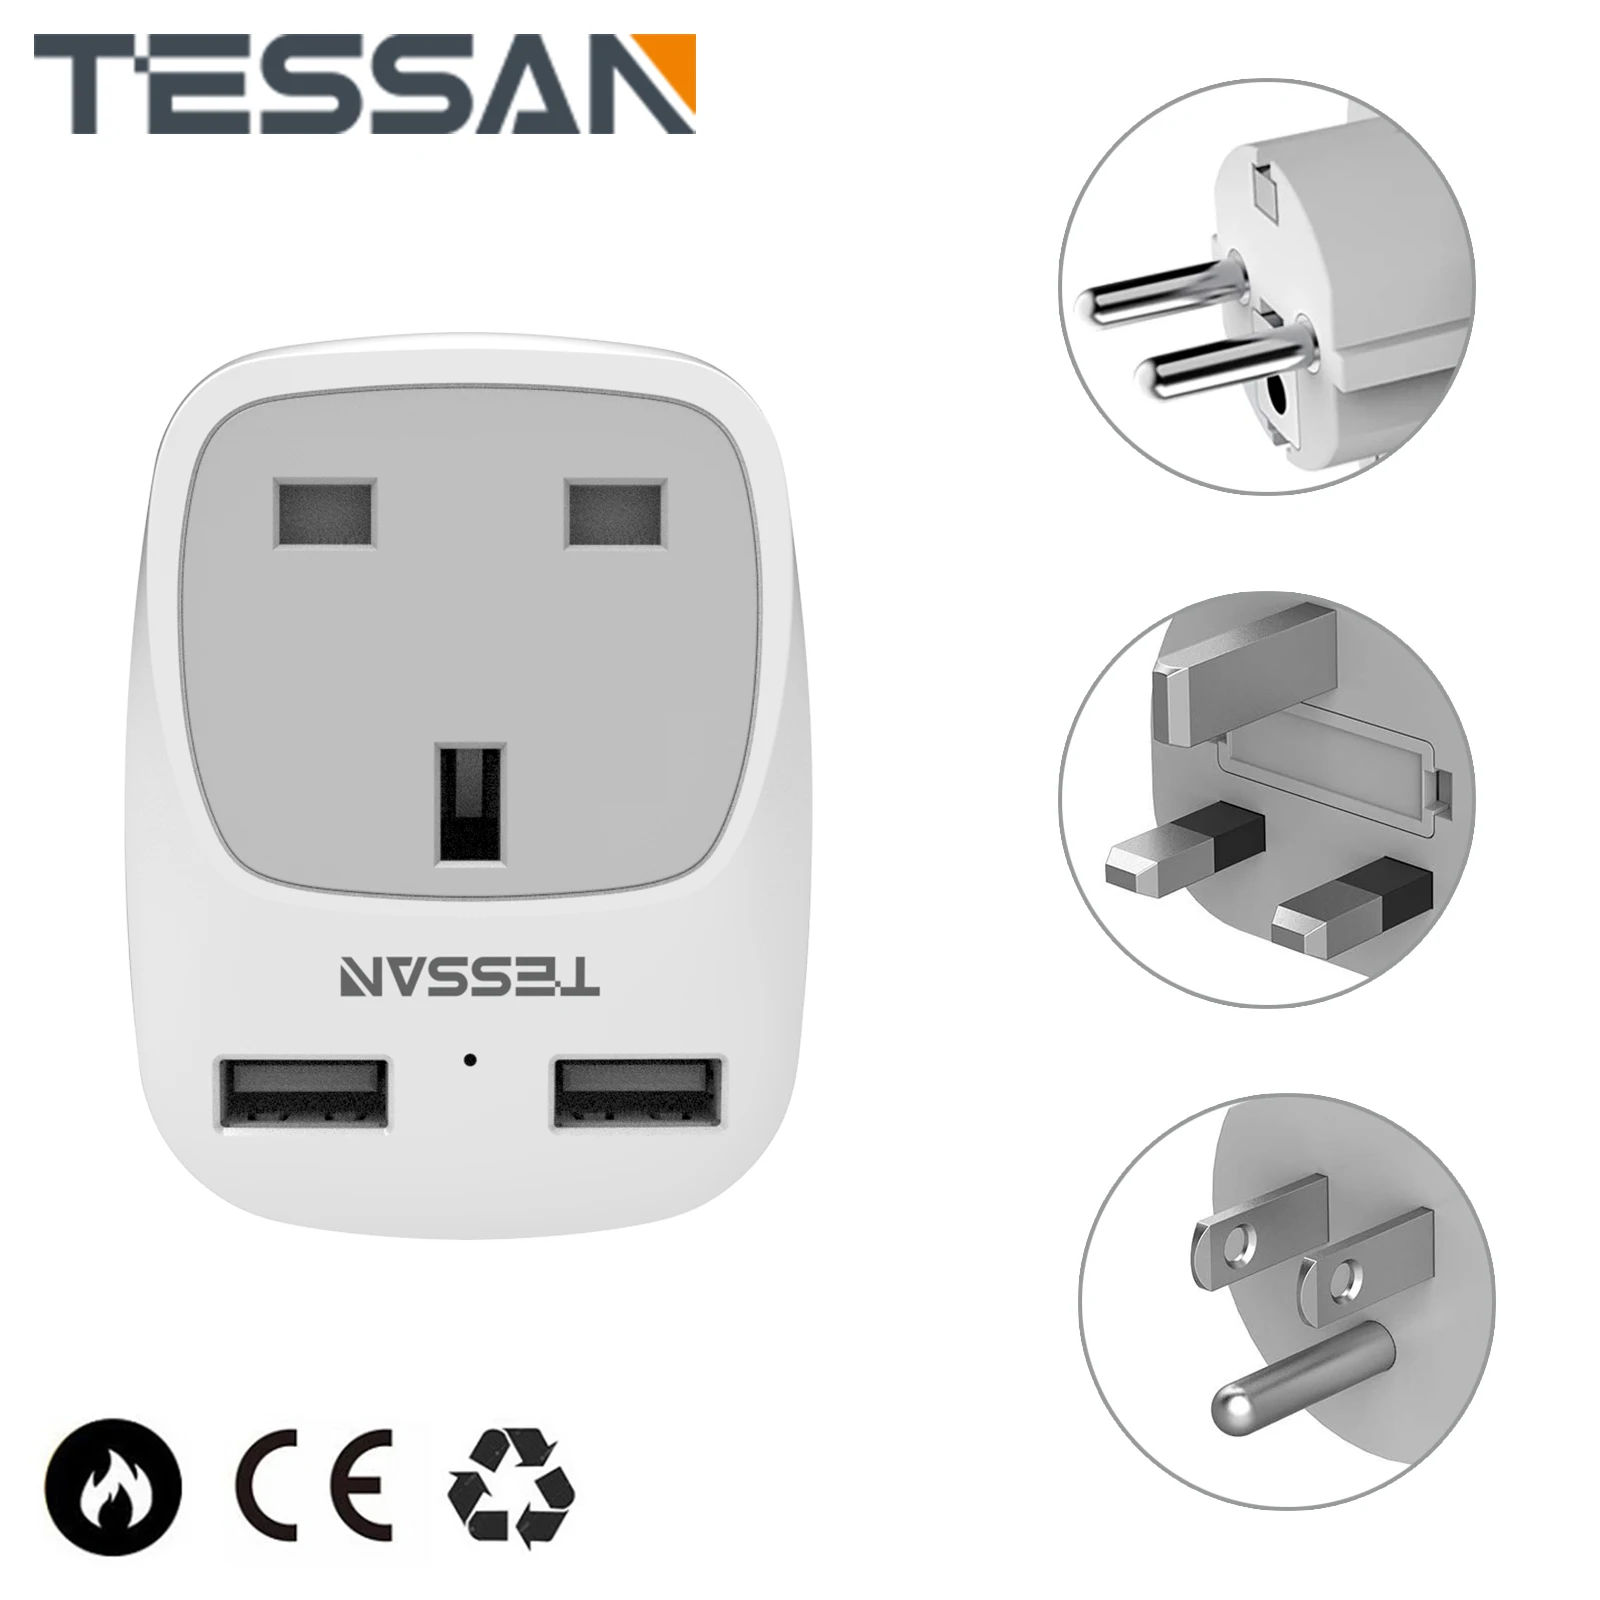 TESSAN UK to EU/US Travel Plug Adapter with 2 USB Ports (2.4A), 3 in 1 Wall USB Charger with Overload Protection for Home/Travel